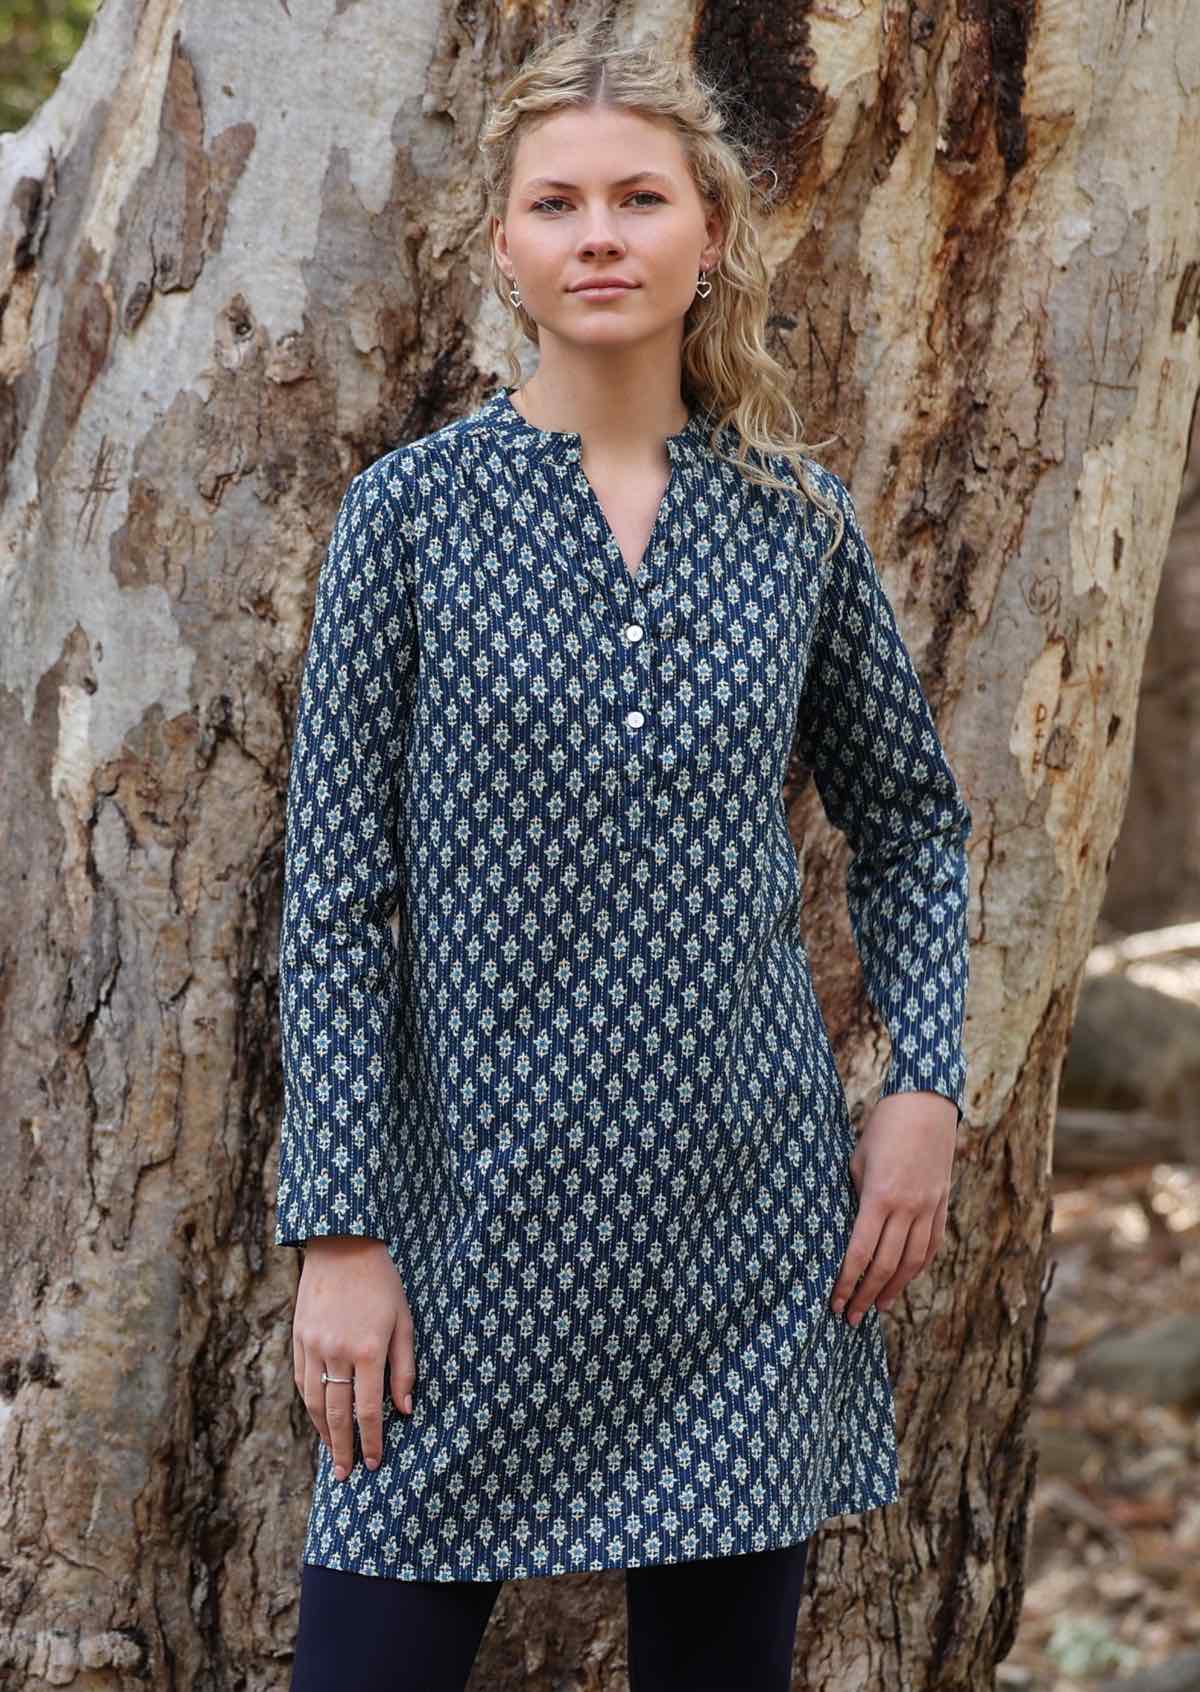 Lightweight cotton tunic with sweet flowers on blue base